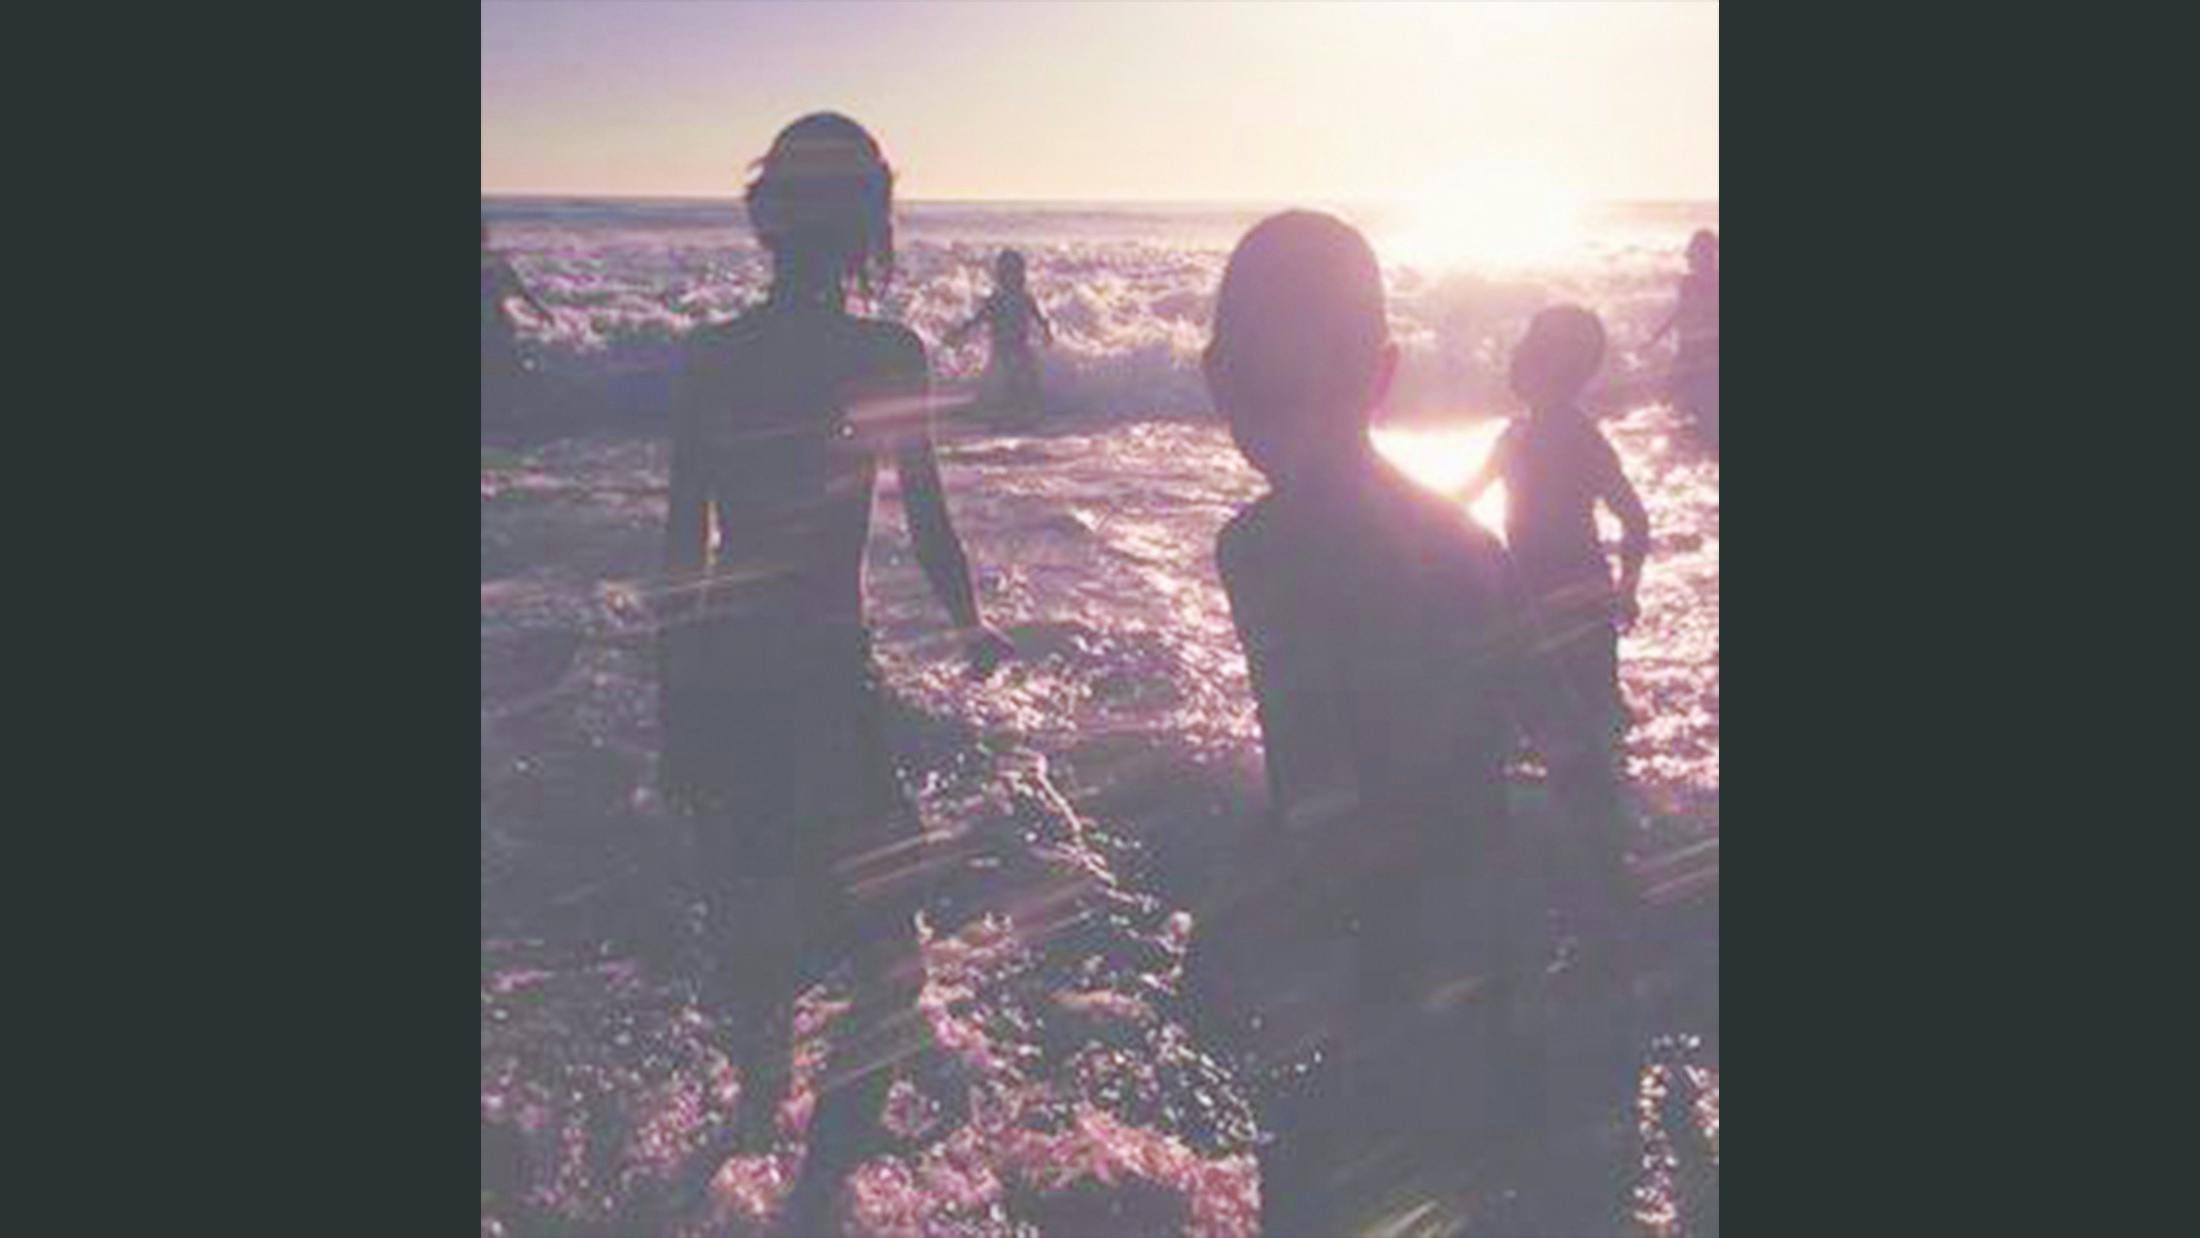 It almost feels as if Linkin Park released two versions of One More Light. There was, briefly, the version that came out on May 19, an album that coalesced the band’s diverse musical tastes. It sparked controversy, all of which was rendered irrelevant when frontman Chester Bennington made the heartbreaking decision to take his own life just two months later. Suddenly, pointedly, One More Light looked like a totally different album. The music’s lighter touch now seemed a mere backdrop to Chester singing lyrics like, ‘I’m dancing with my demons; I’m hanging off the edge.’